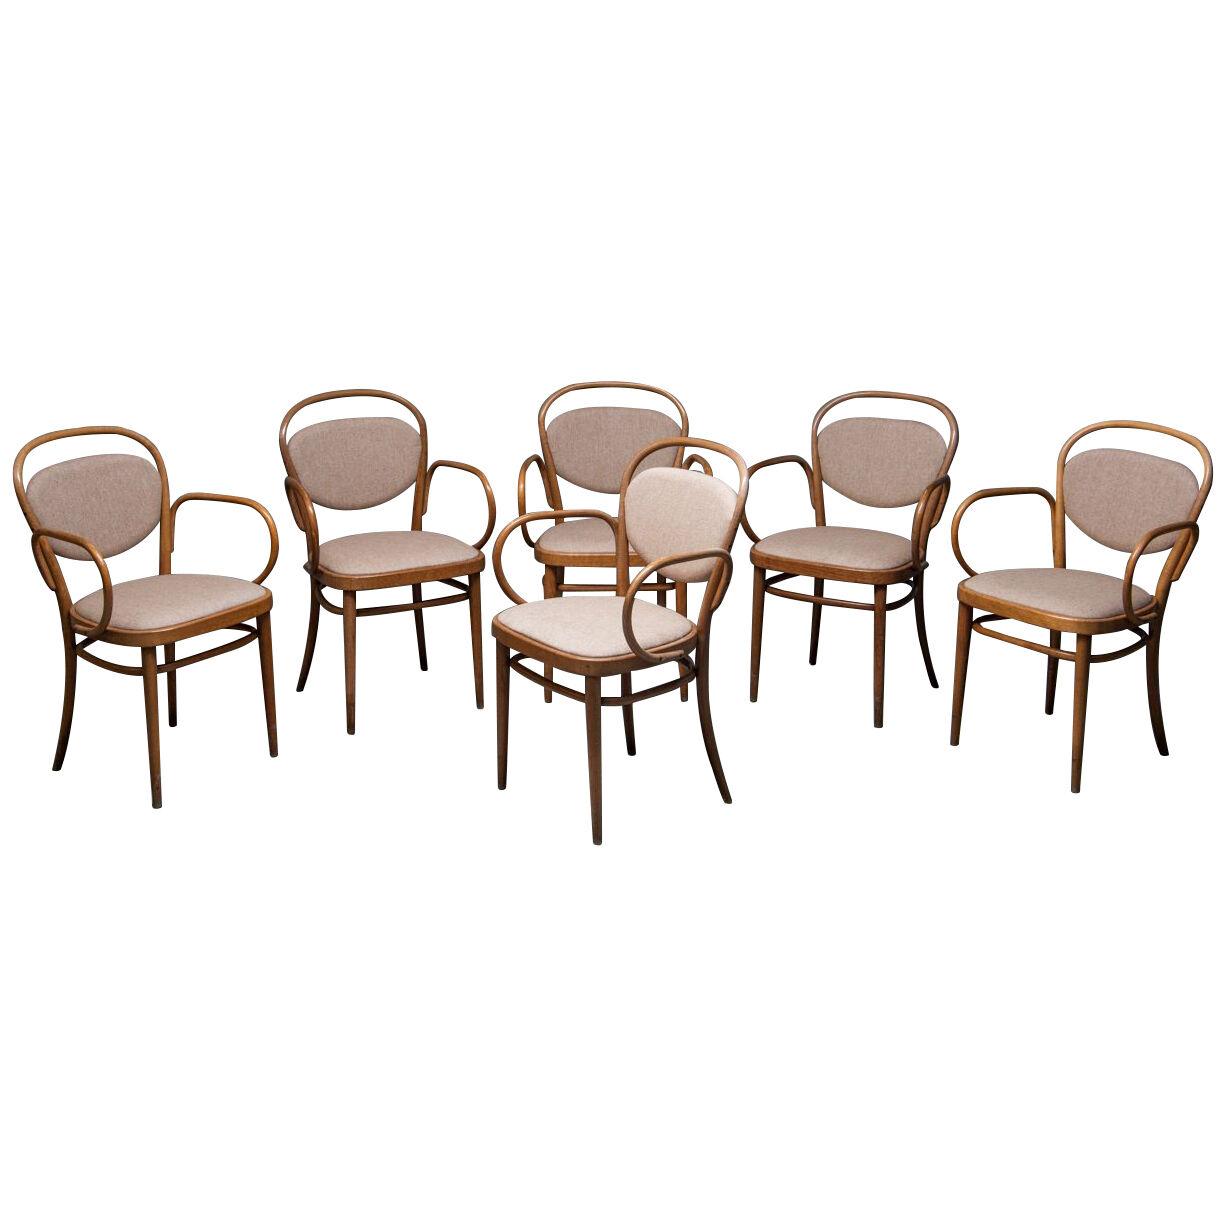 Set of 6 PF215 dining chairs, Michael Thonet, Germany, 1950s